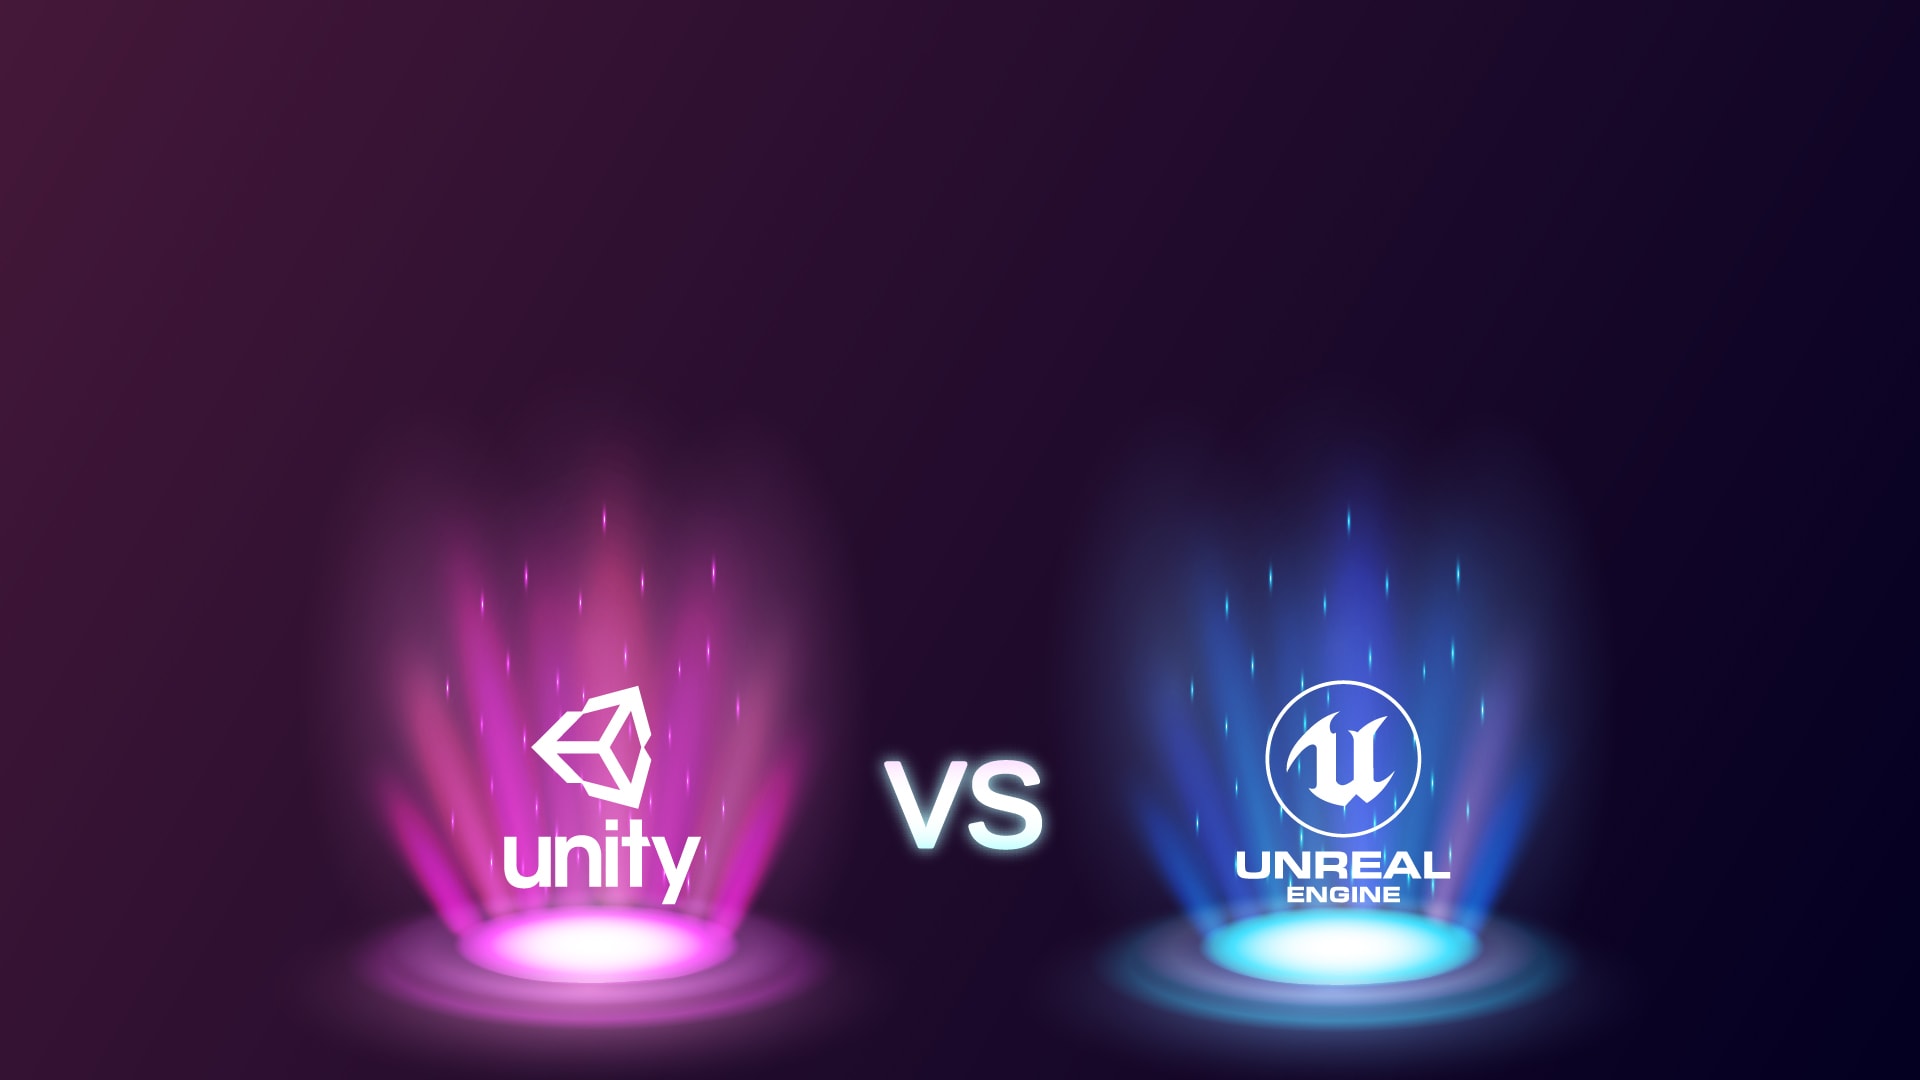 Unreal Engine vs Unity Which One is better for Game Development?